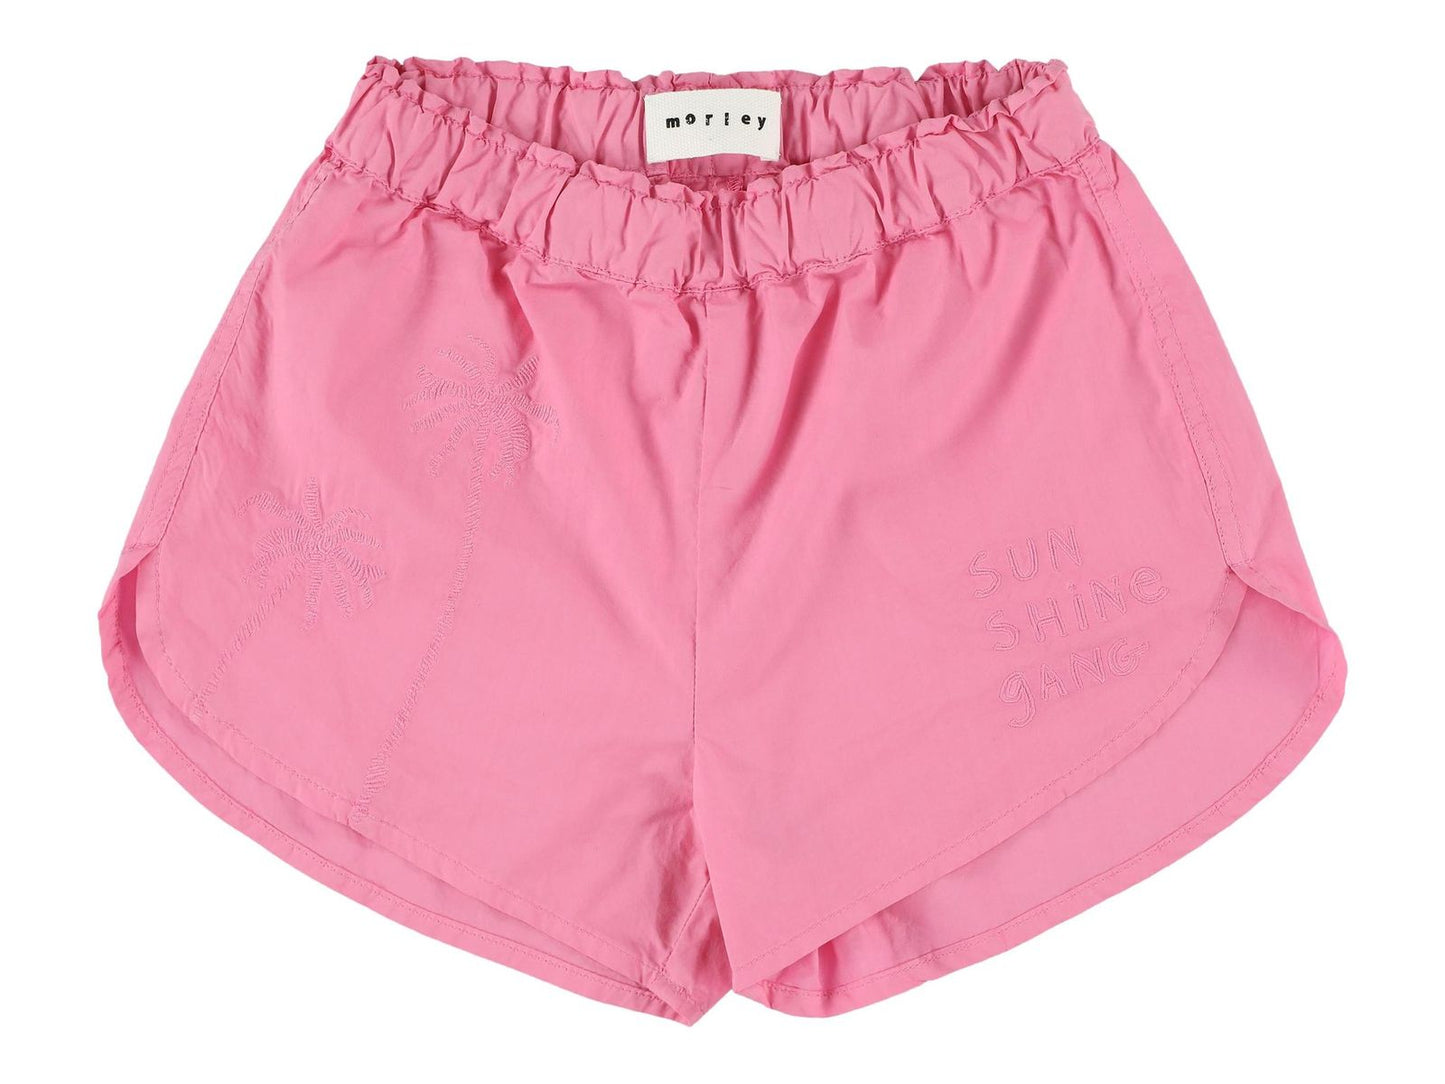 Morley Uwe Short With Embroidery and Elastic Waistband in Begonia